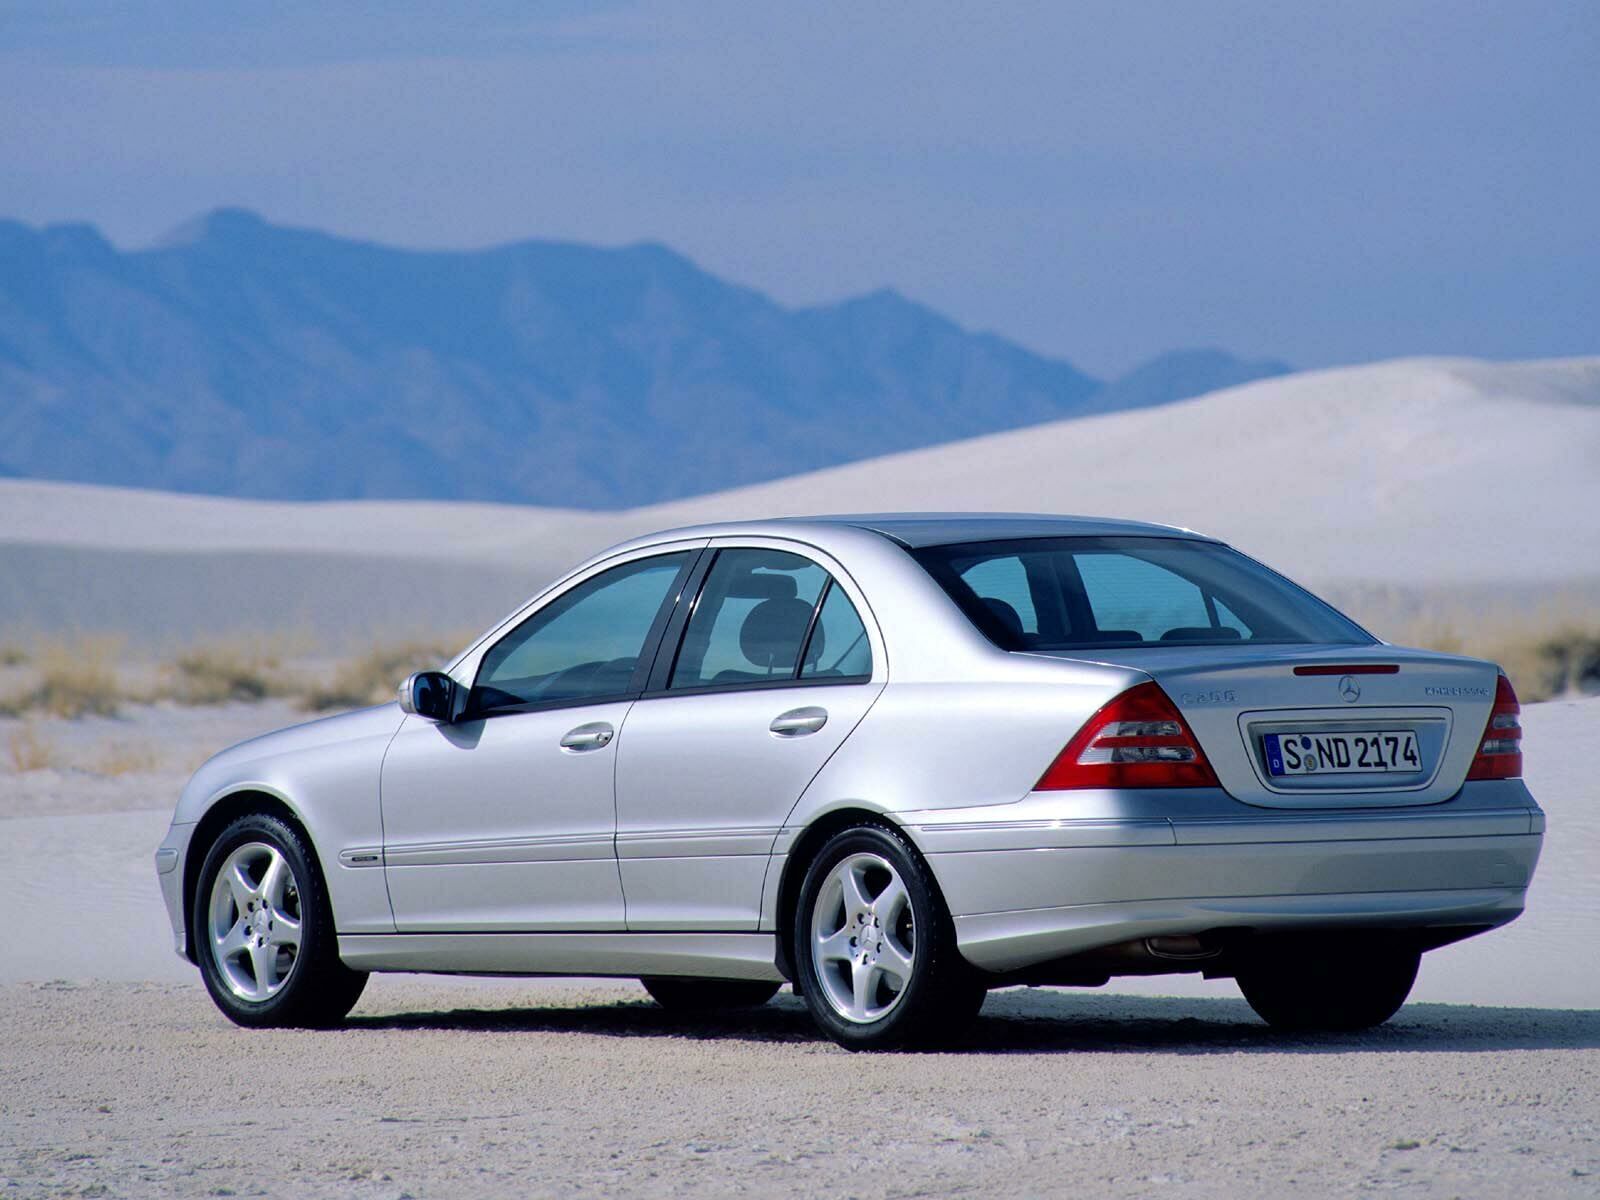 Mercedes Benz C Class 2001 - 2007 Prices in Pakistan, Pictures and